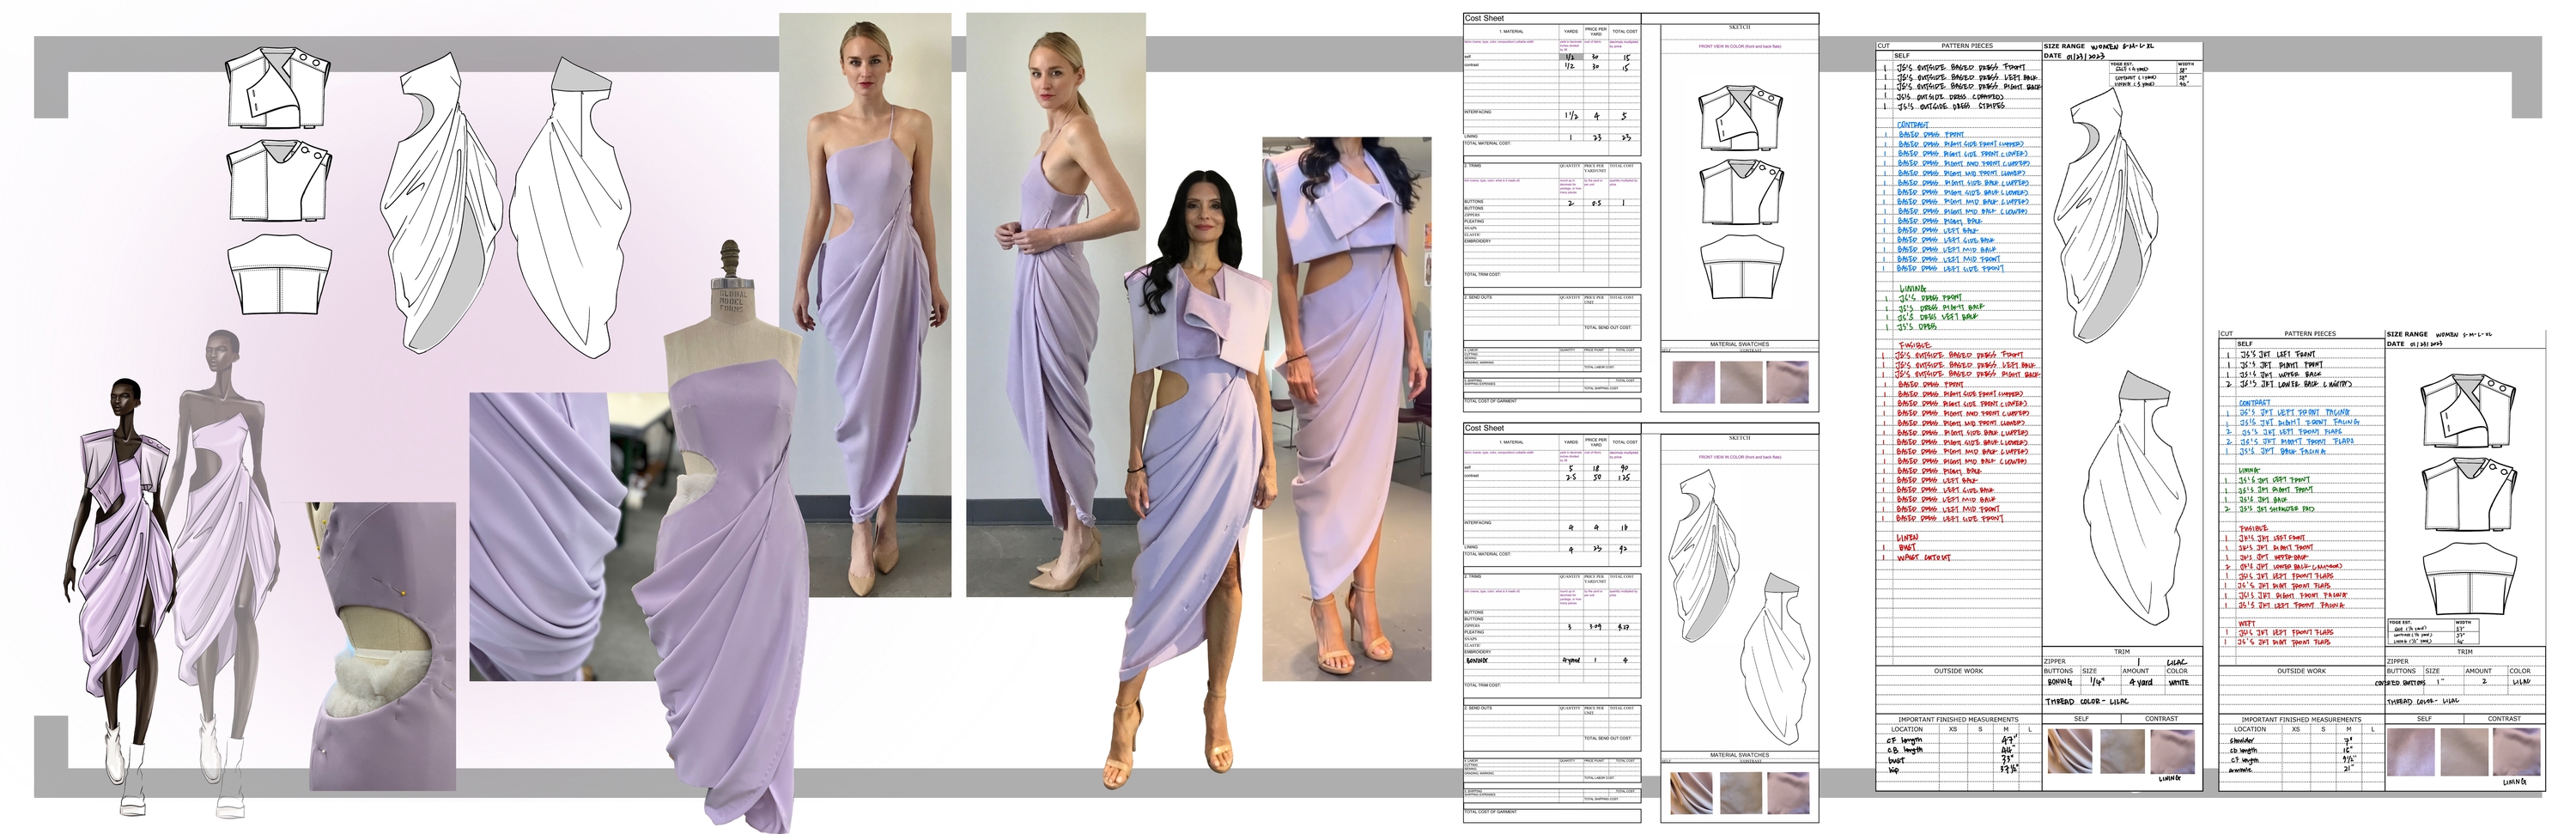 working process of making the actual garment